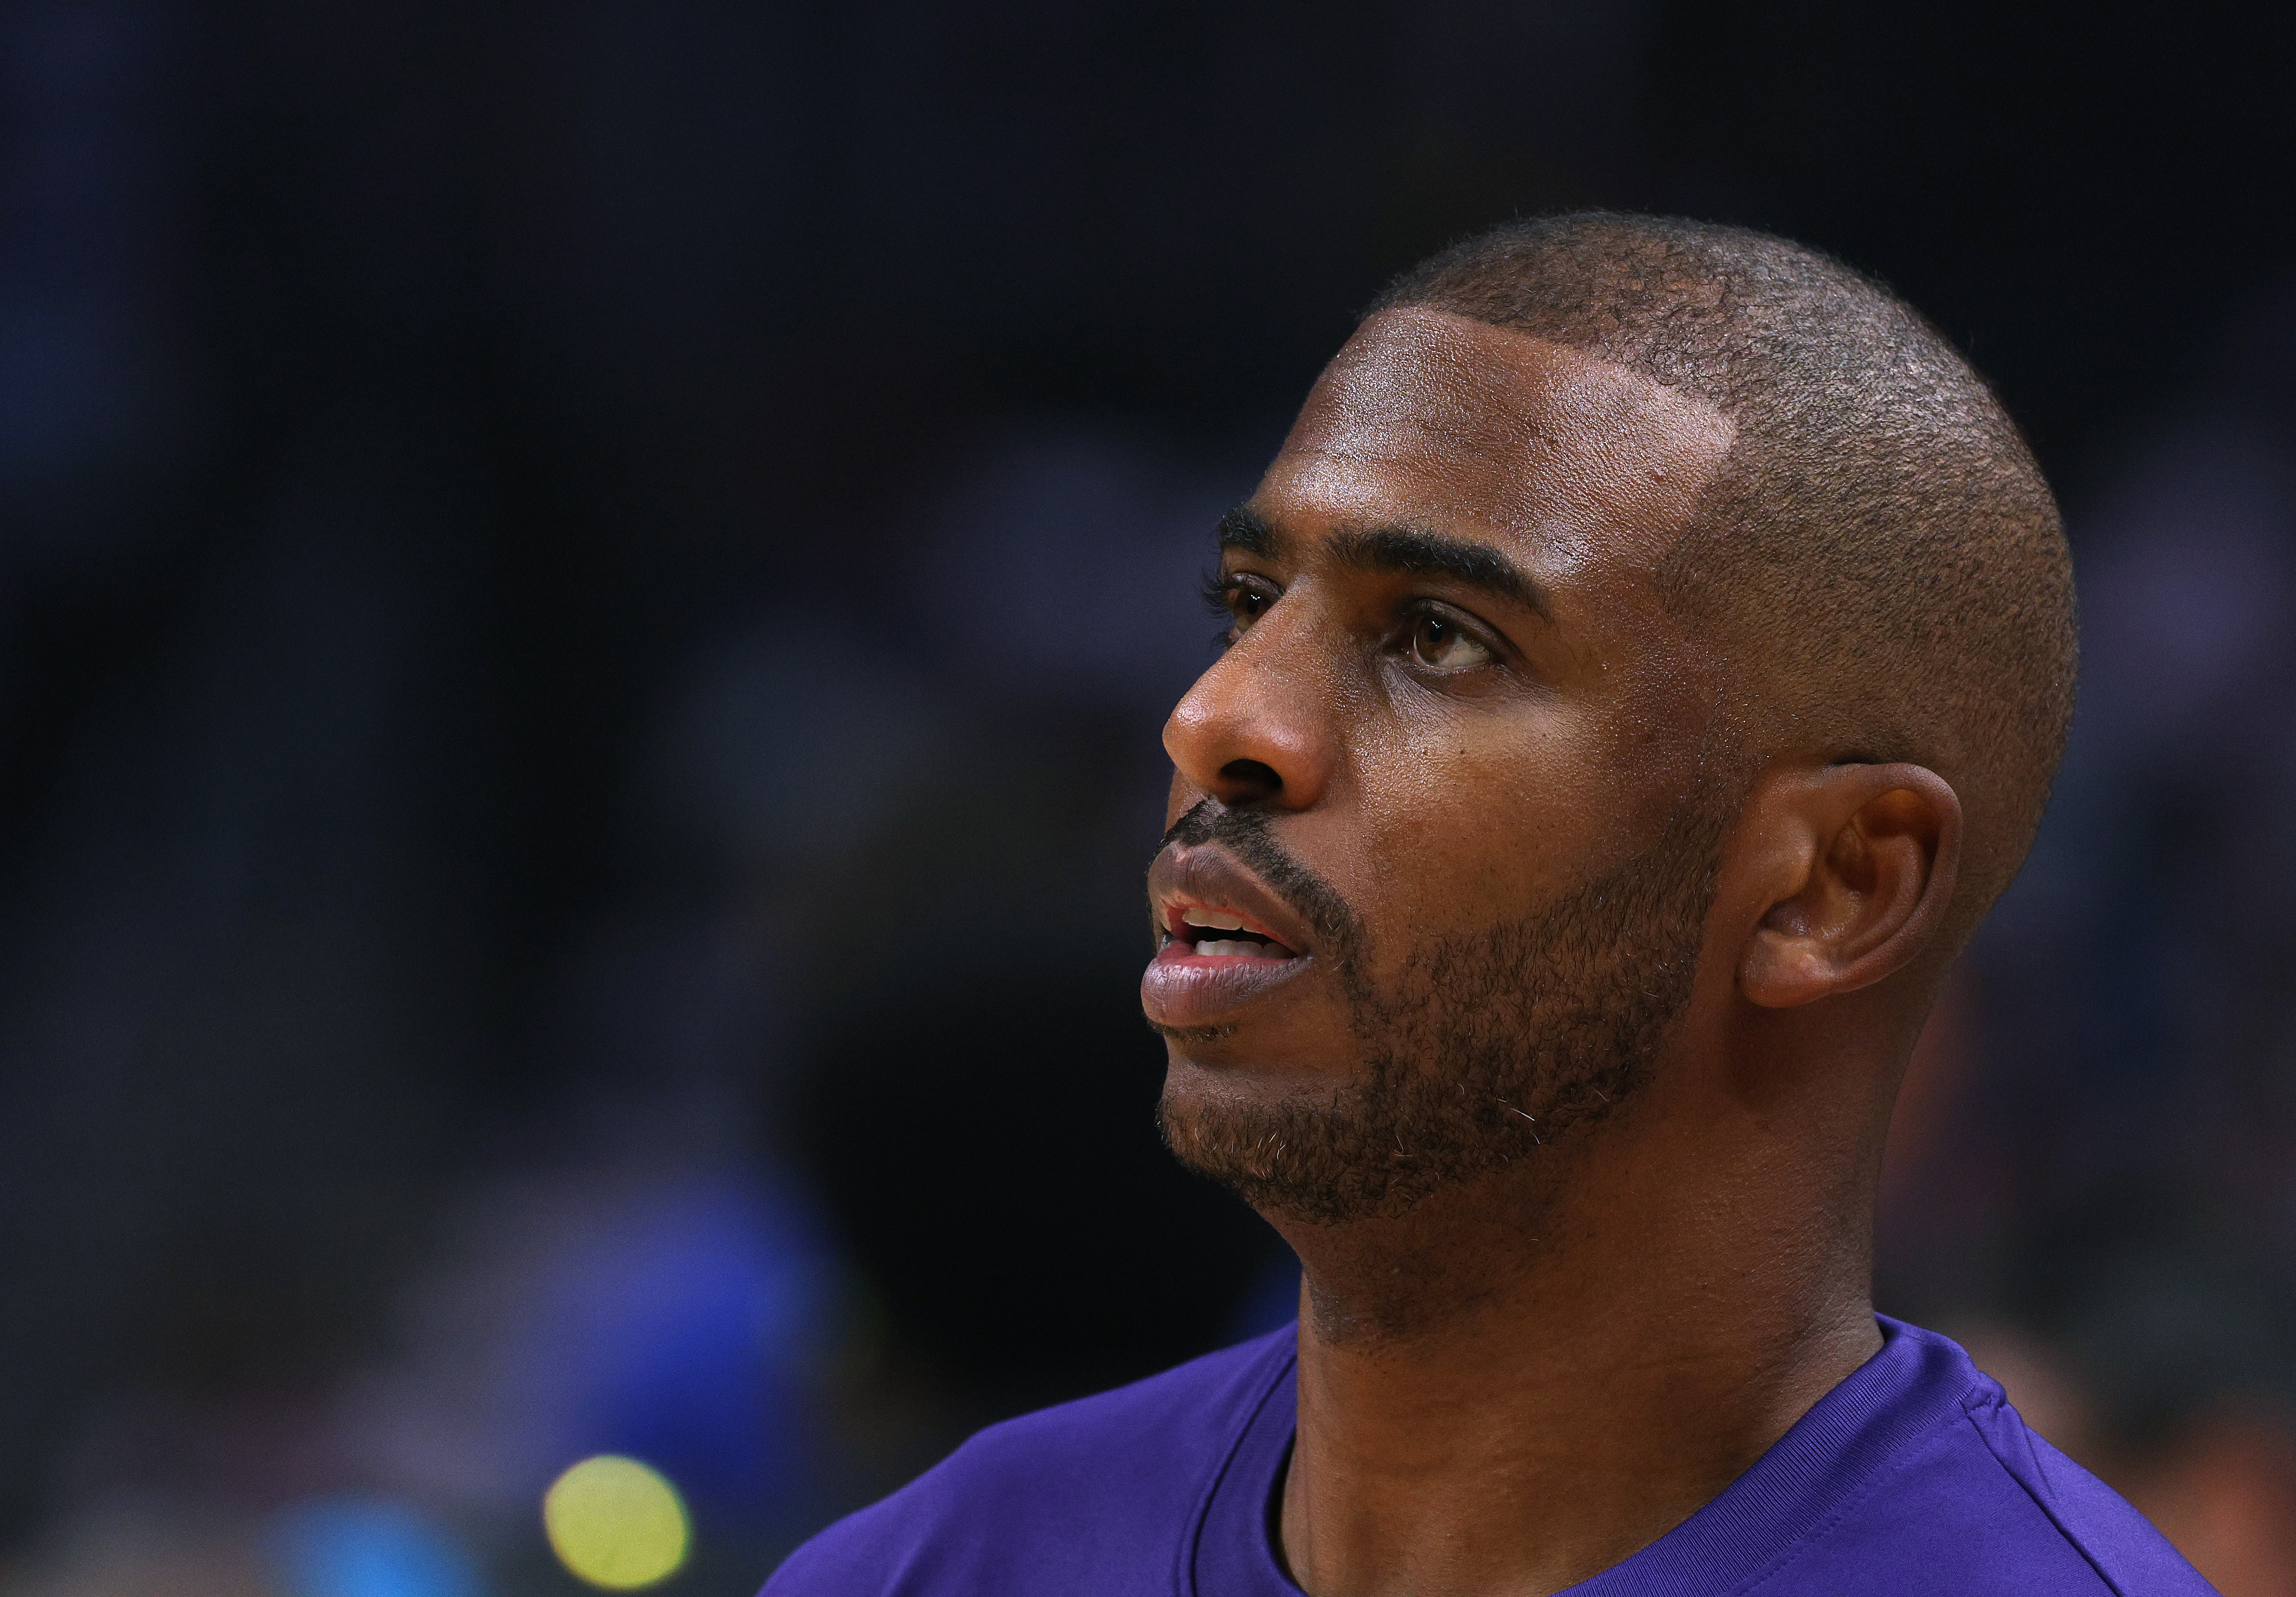 Chris Paul's son looks good in dribbling drills  before dad drains  3-pointer in his face